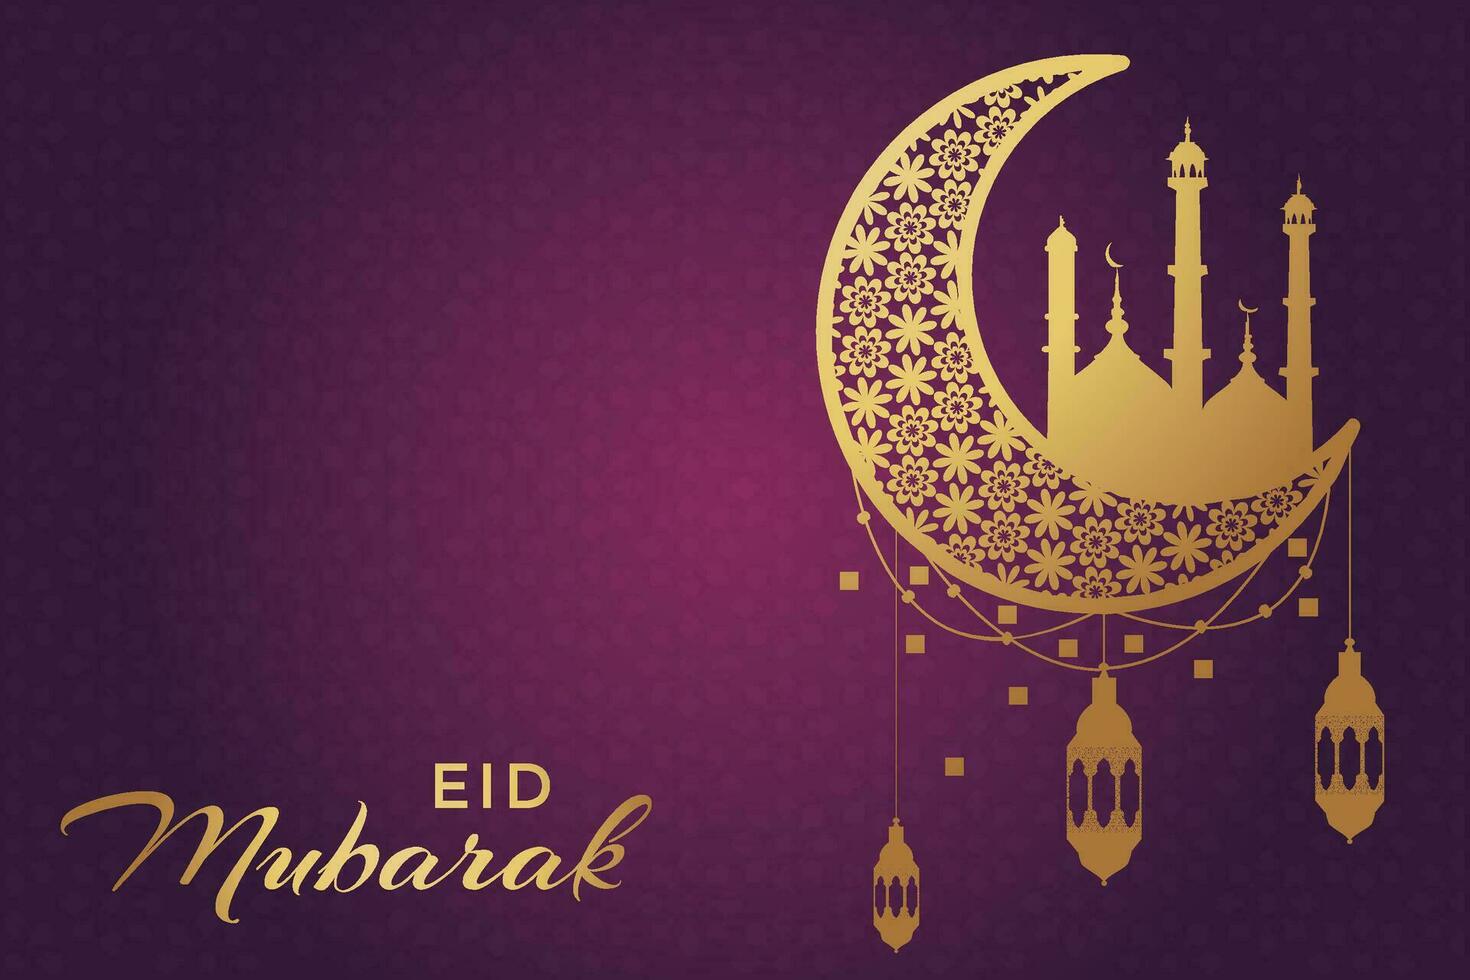 eid mubarak greeting card with crescent and mosque vector